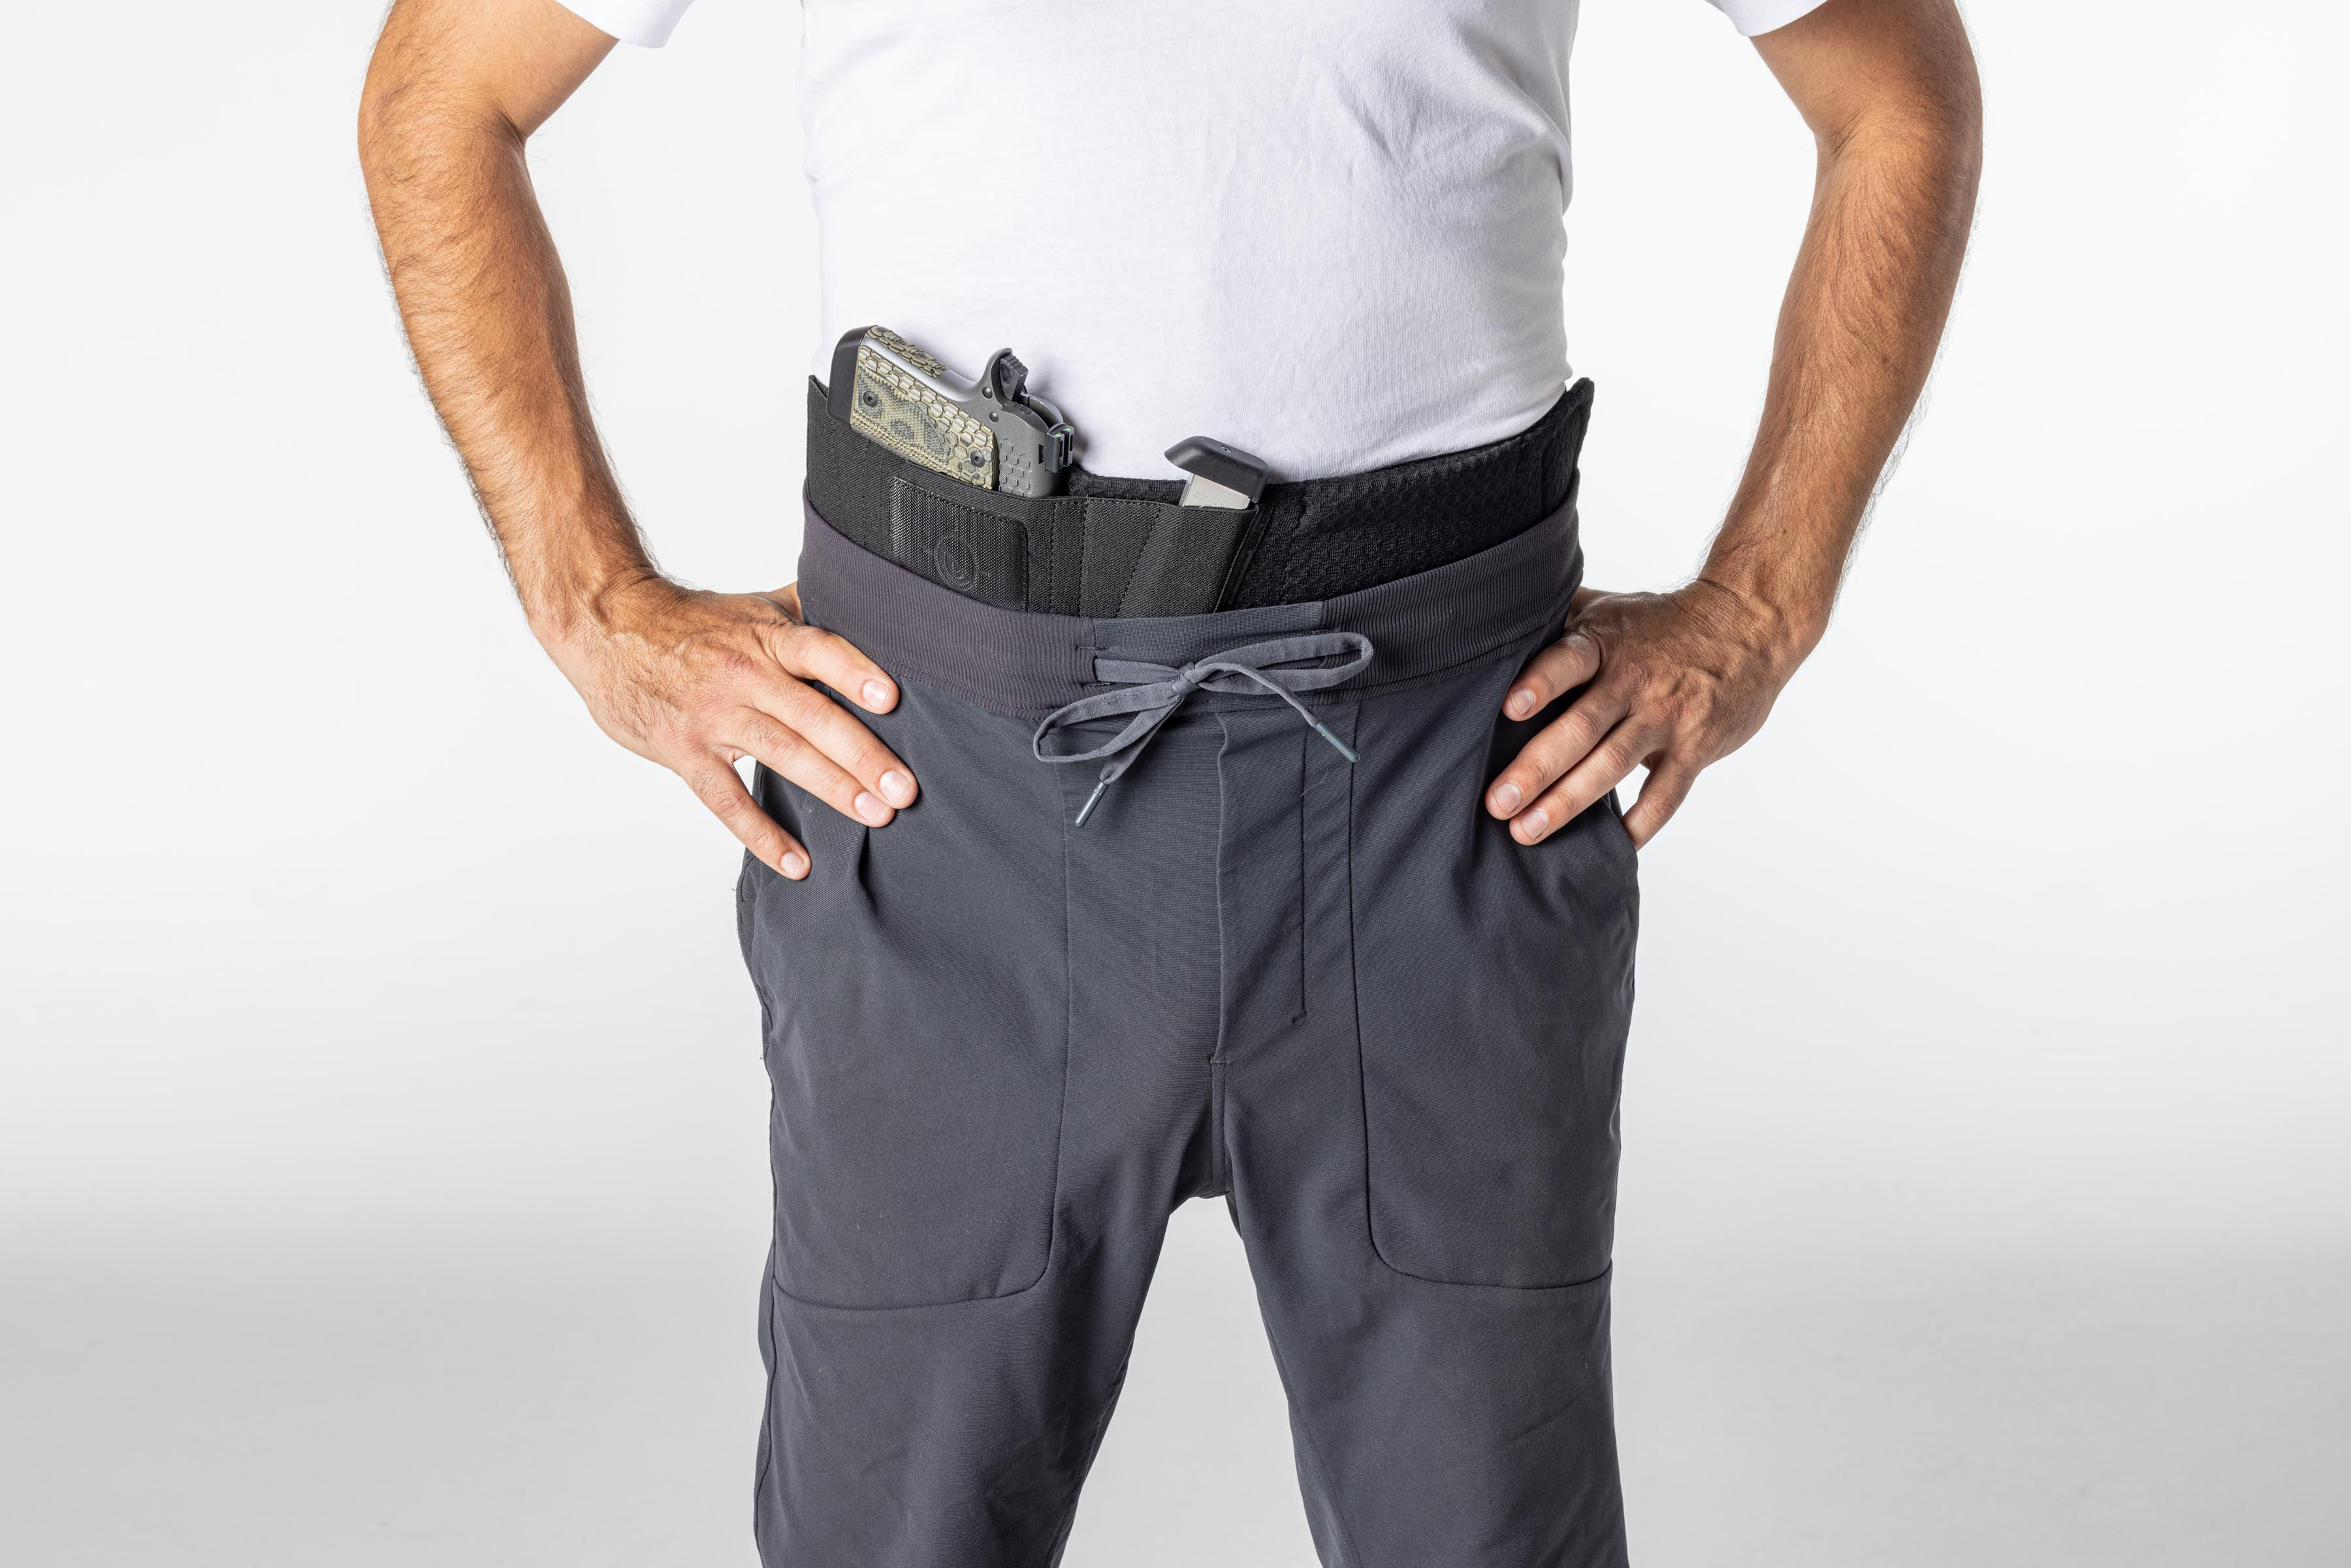 Safest Belly Band Holster  Tactica Belly Band 